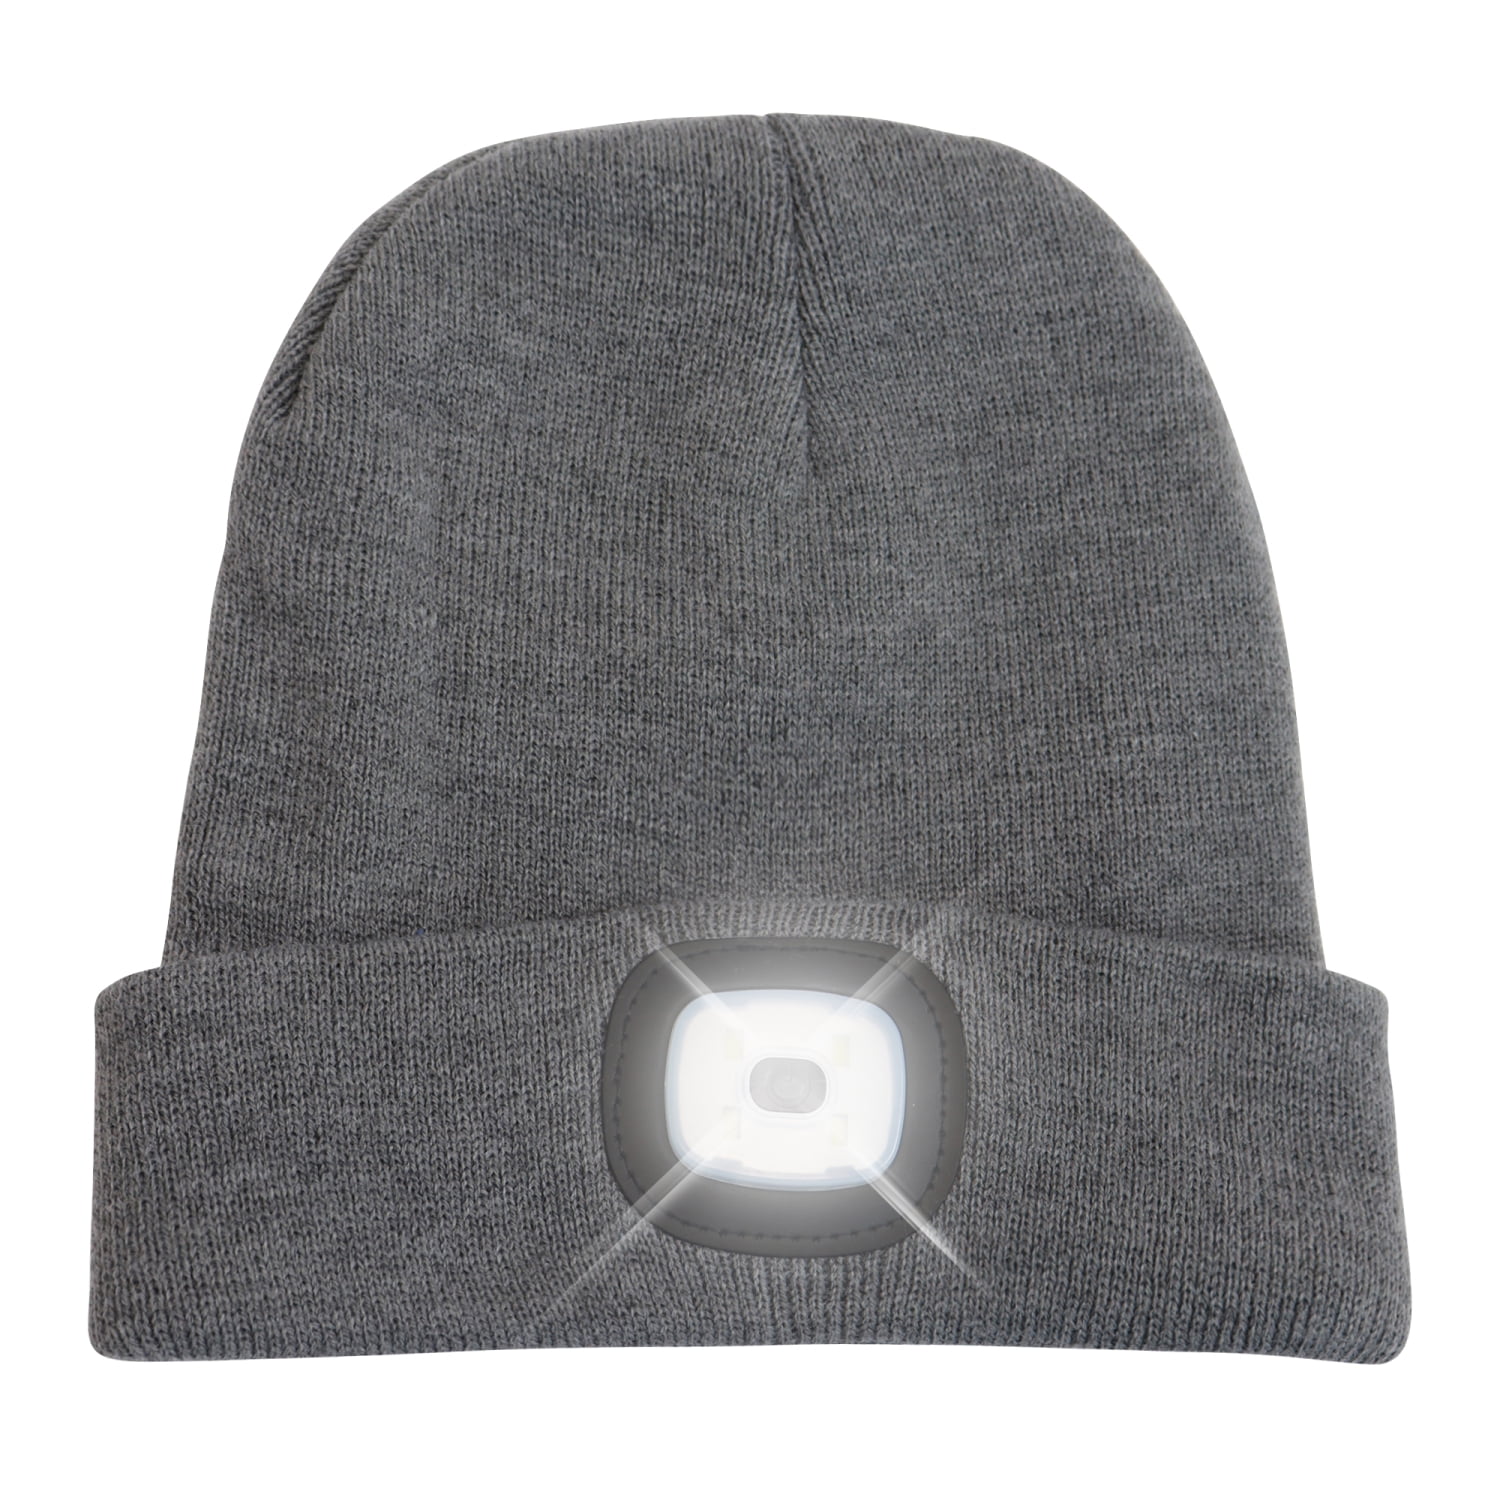 Brandwell Kids Novelty LED Torch Hat USB Rechargeable Beanie Hat Outdoor Wear 